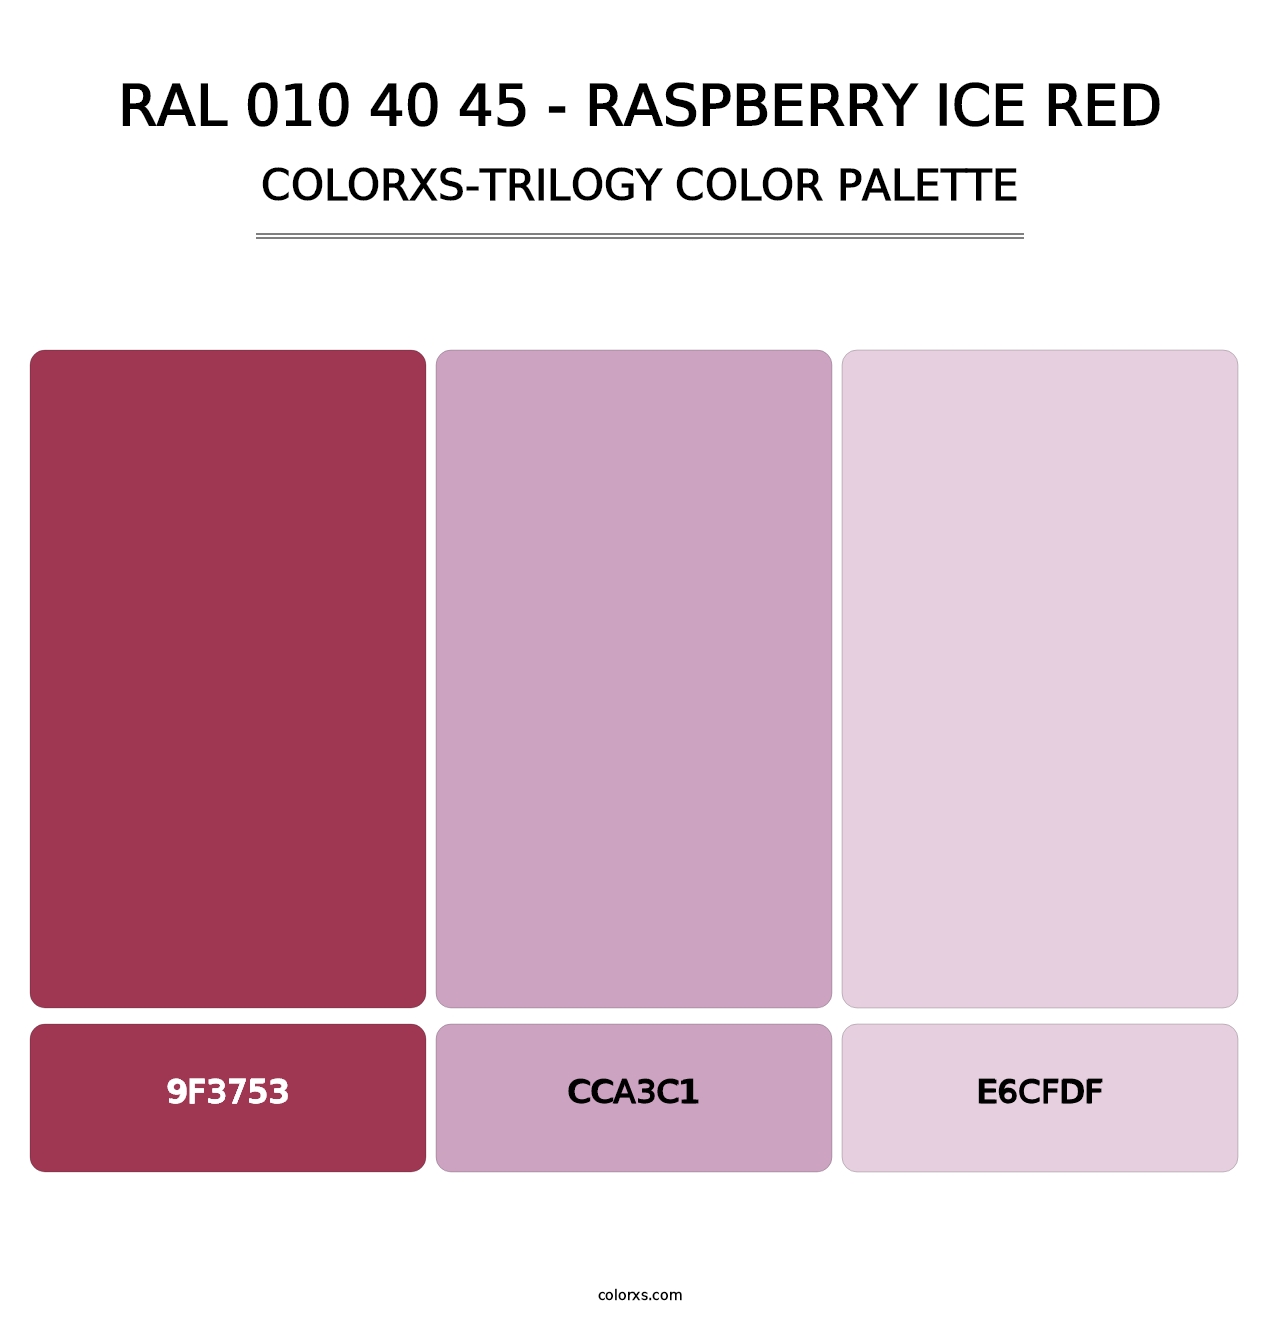 RAL 010 40 45 - Raspberry Ice Red - Colorxs Trilogy Palette